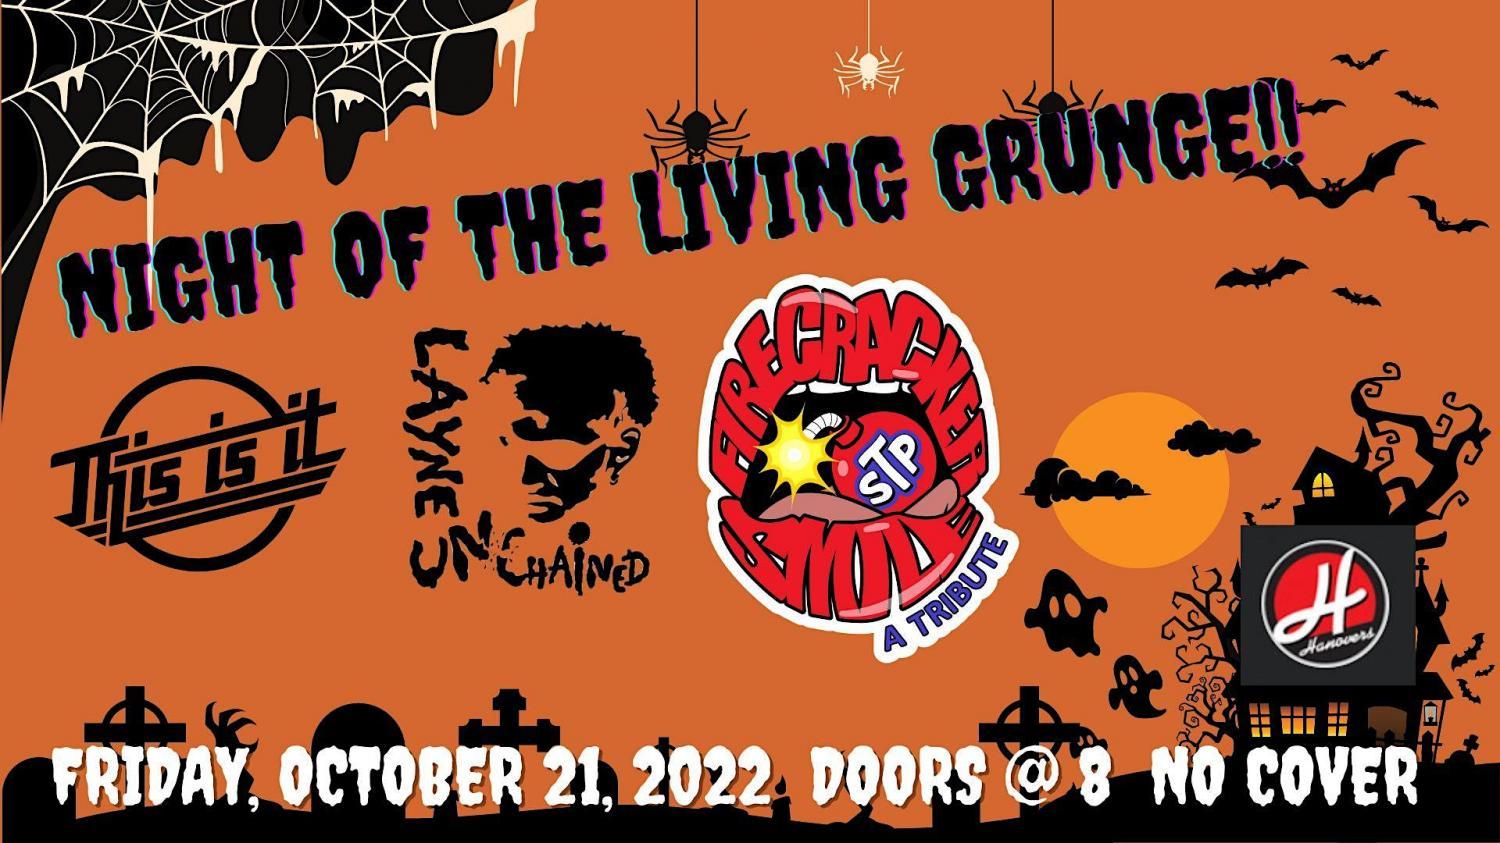 Night of the Living Grunge @ Hanovers Pflugerville
Fri Oct 21, 7:00 PM - Sat Oct 22, 1:00 AM
in 2 days